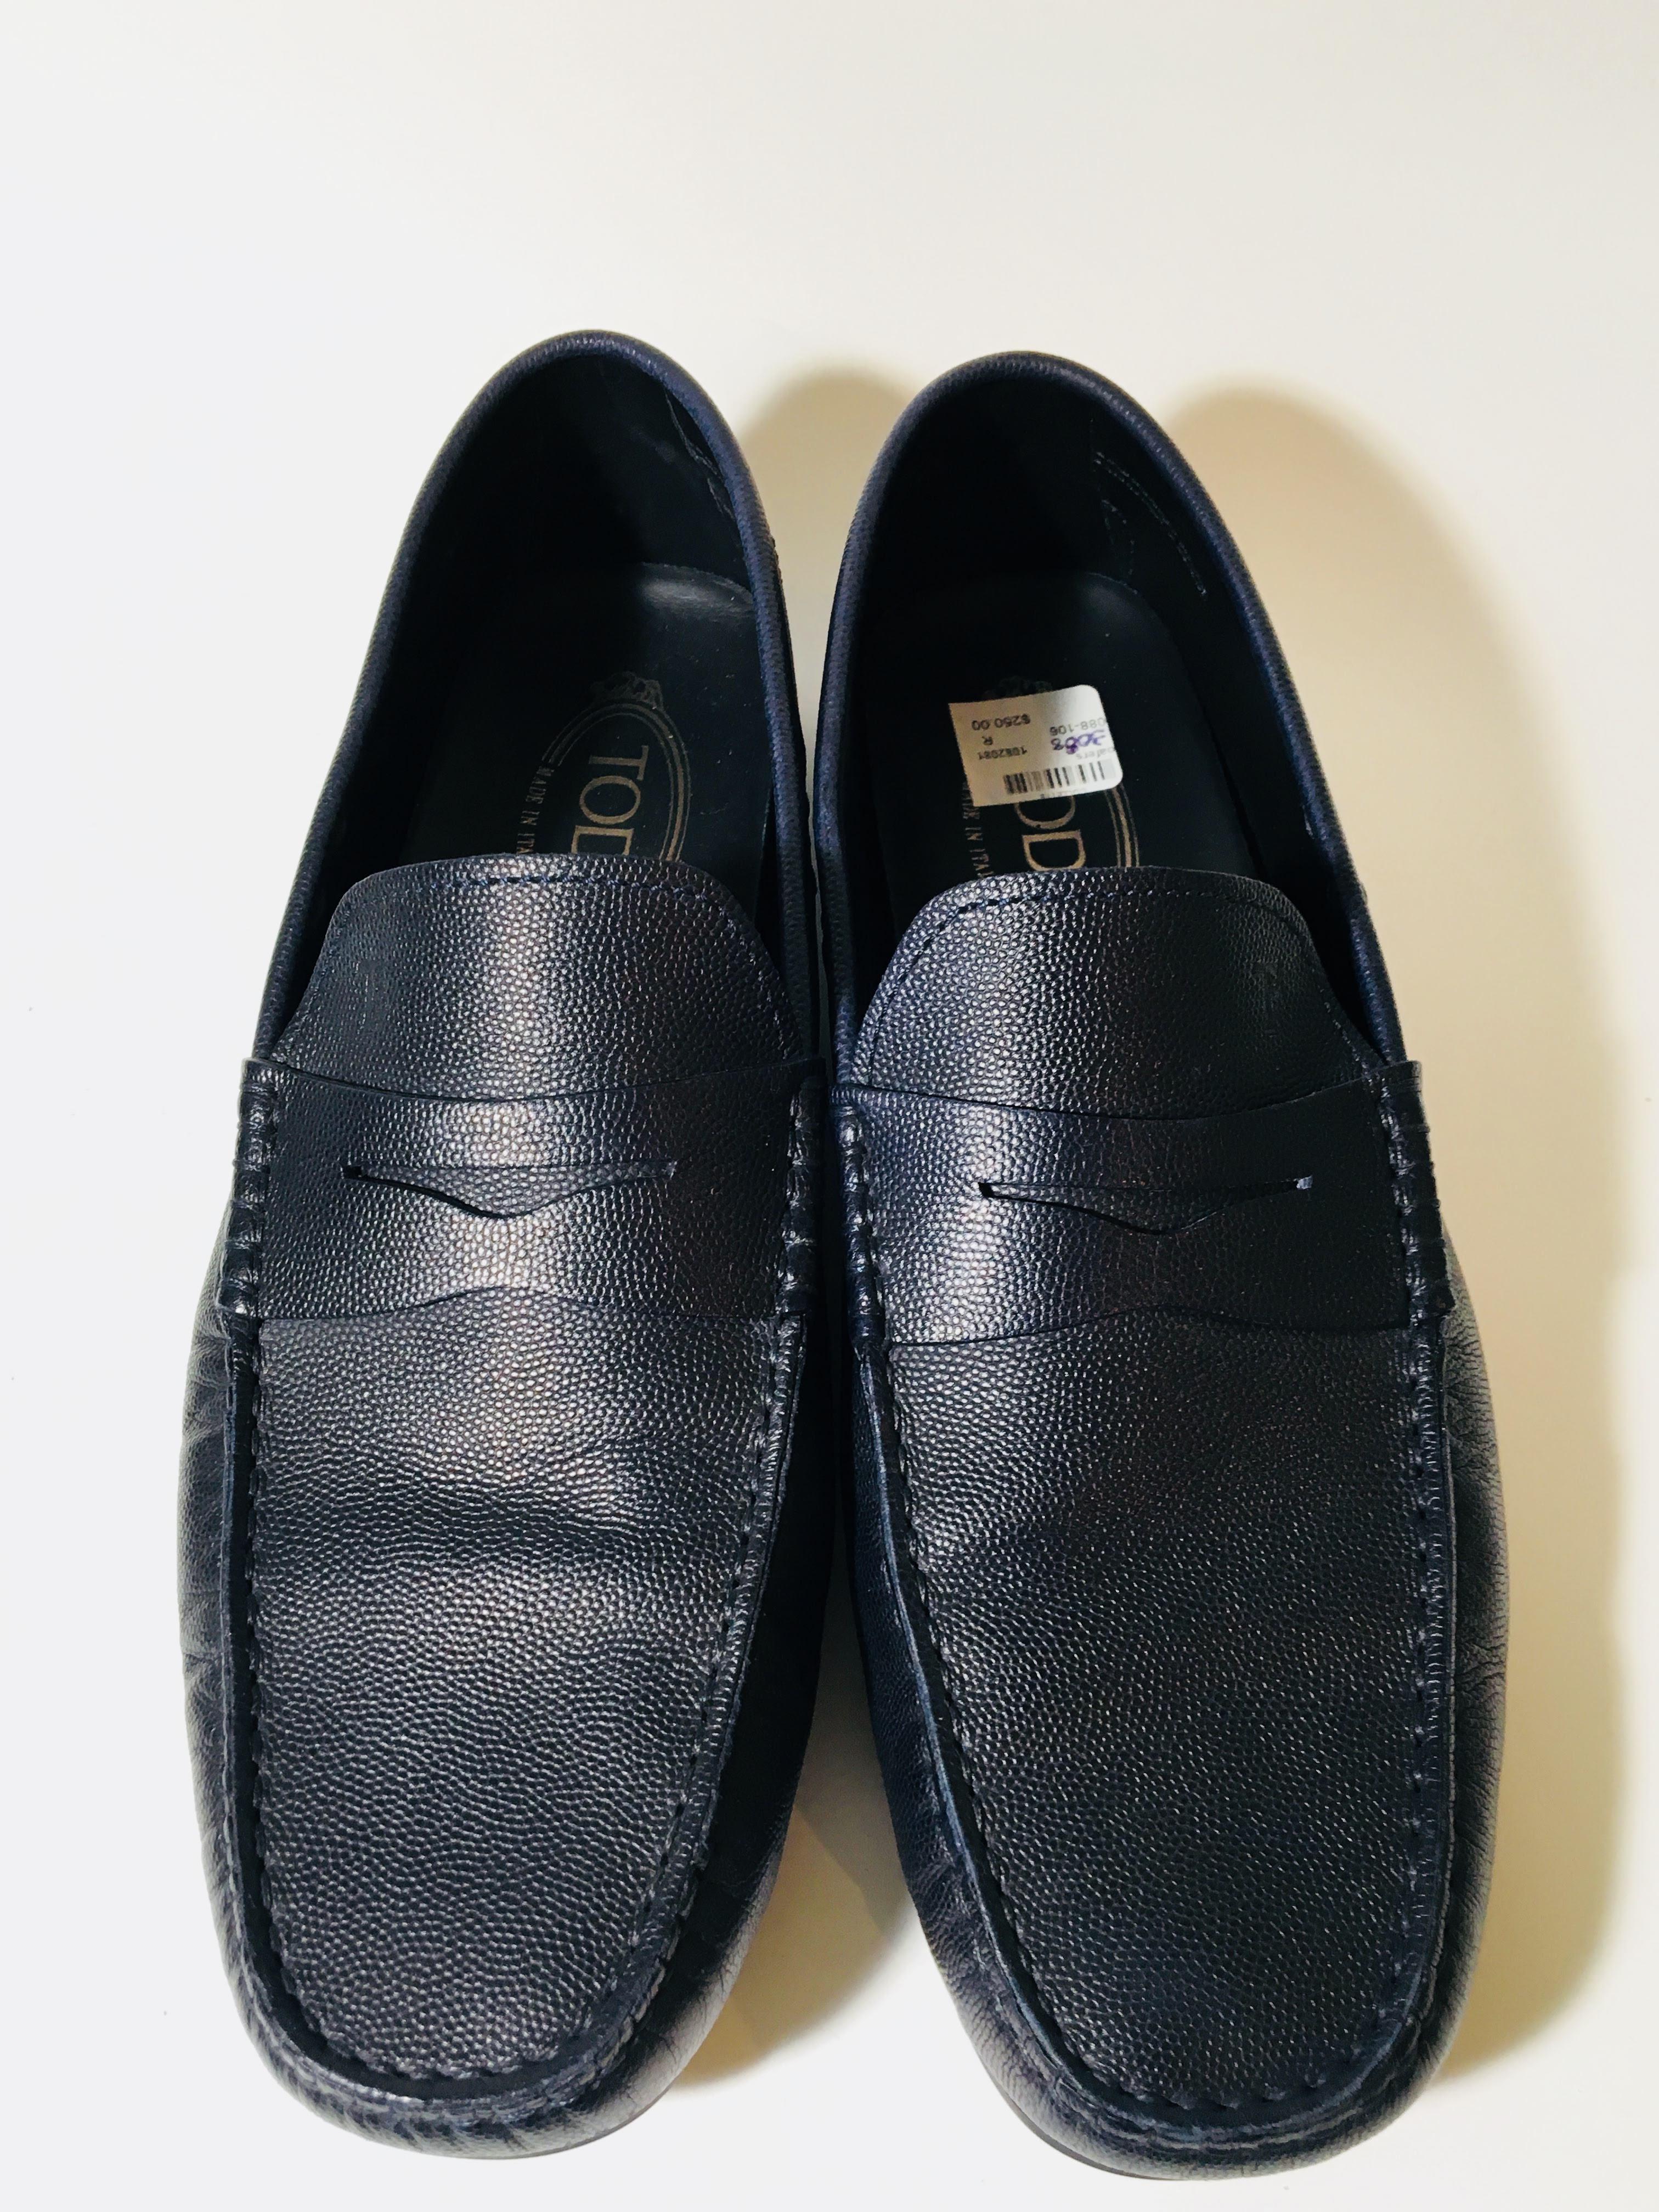 Round Toe Navy Leather Penny Loafers with Rubber Studded Soles.